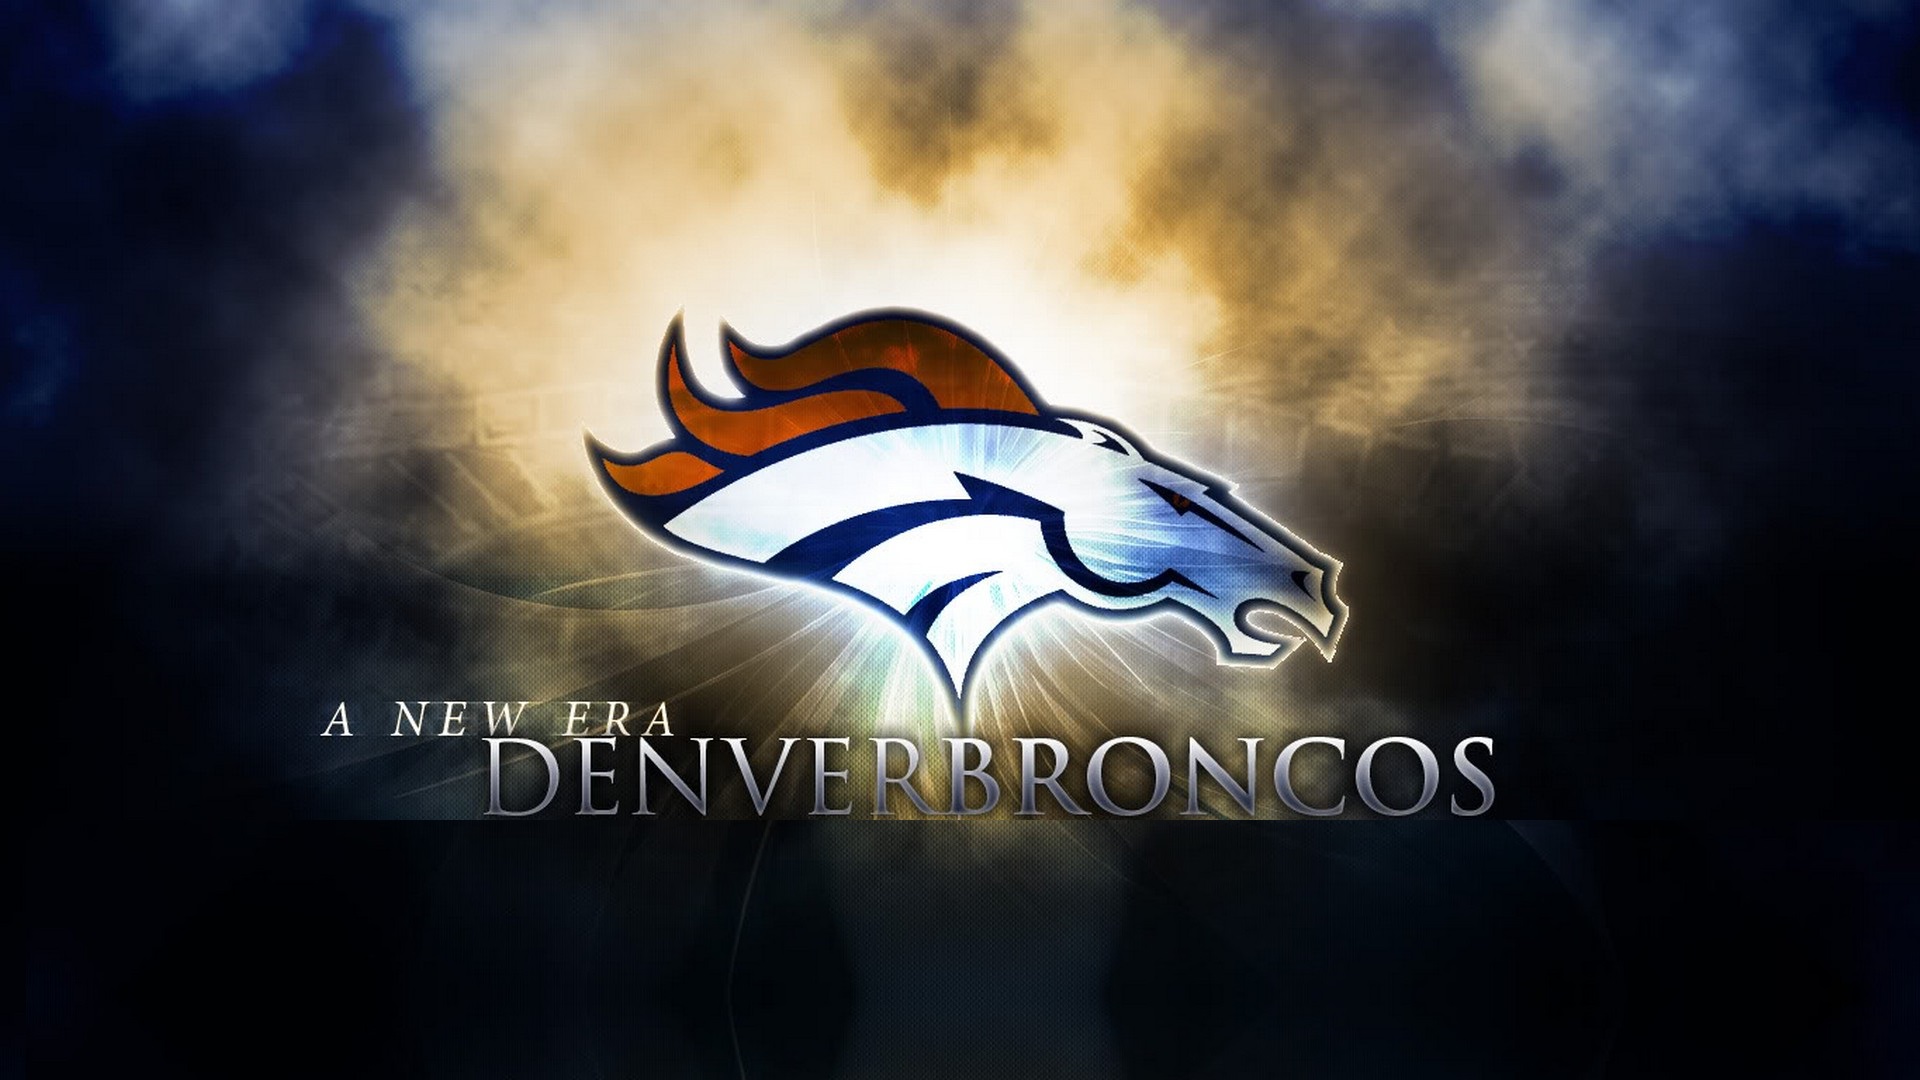 HD Backgrounds Denver Broncos NFL with high-resolution 1920x1080 pixel. You can use this wallpaper for your Mac or Windows Desktop Background, iPhone, Android or Tablet and another Smartphone device